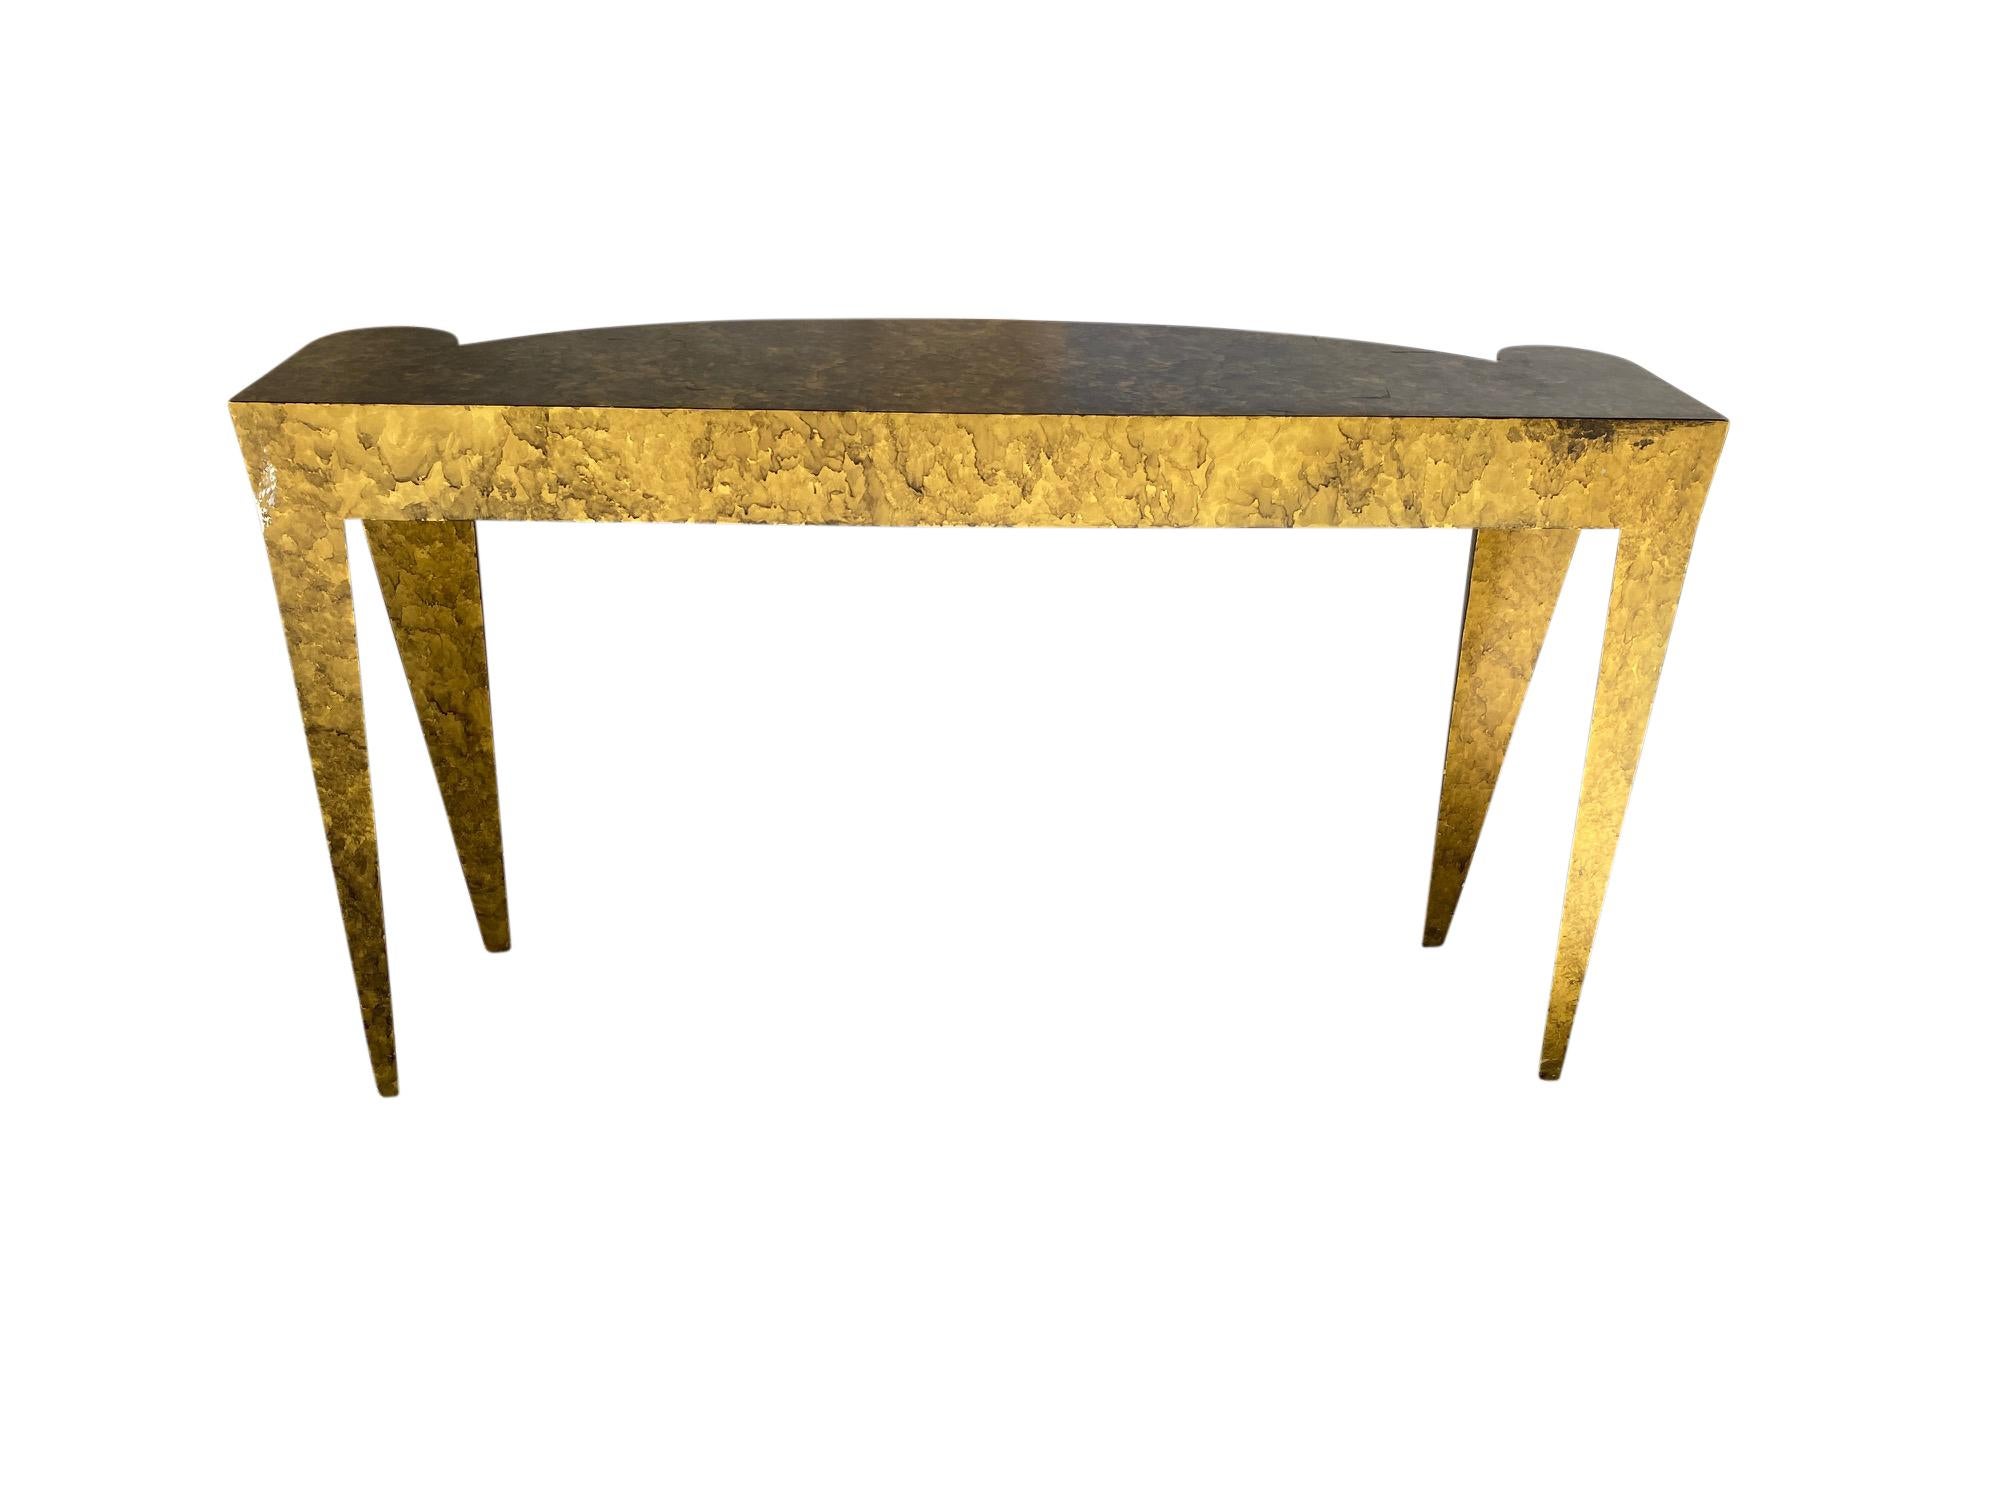 Mexican Brutalist Metal Console, Modern Entry, End Table For Sale 1